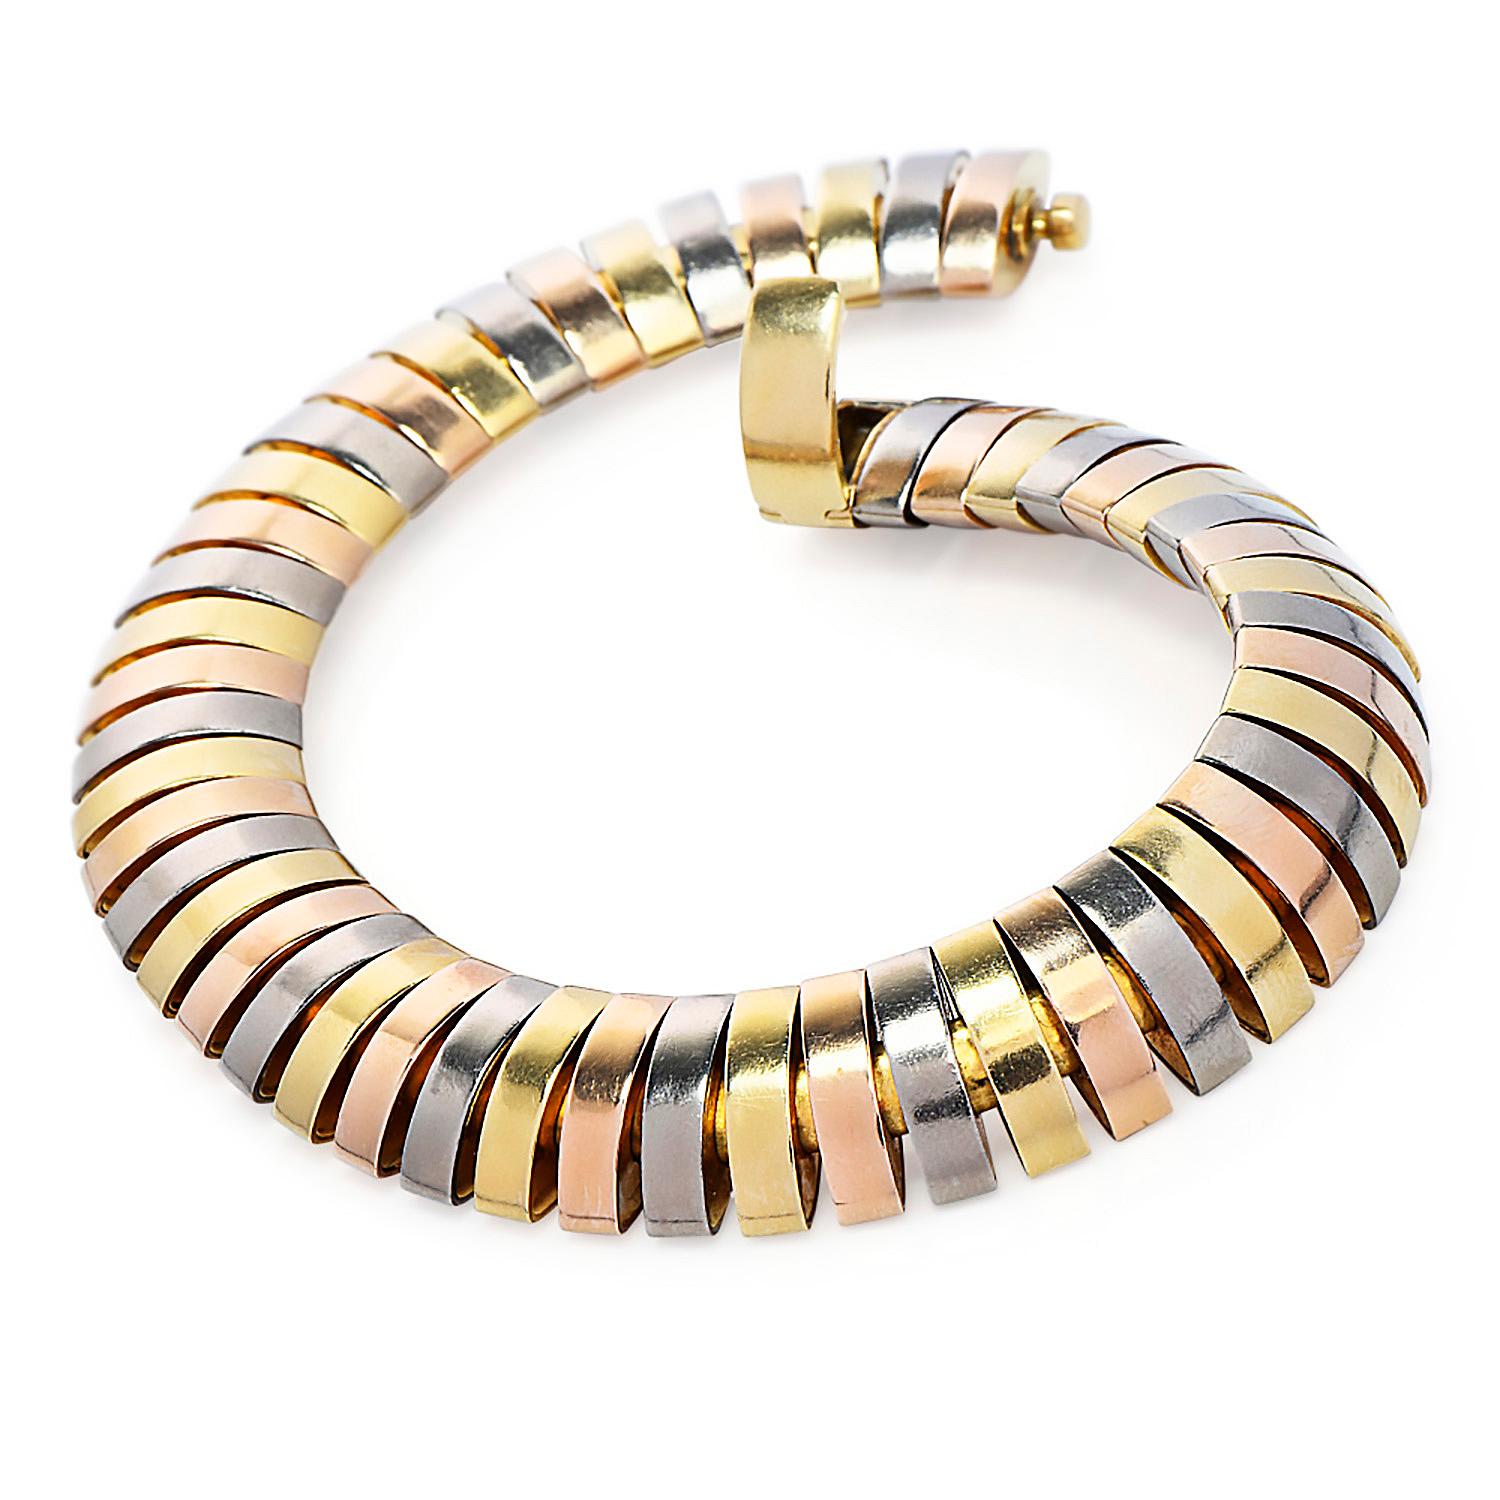 The timeless elegance and beauty from Cartier, 

Is represented on this signature Tri-Color Tubogas Link Bracelet.

Made in solid 18K Gold, with highly polished white, rose & yellow gold omega-shaped wide Links.

Secured by an insert clasp, with a